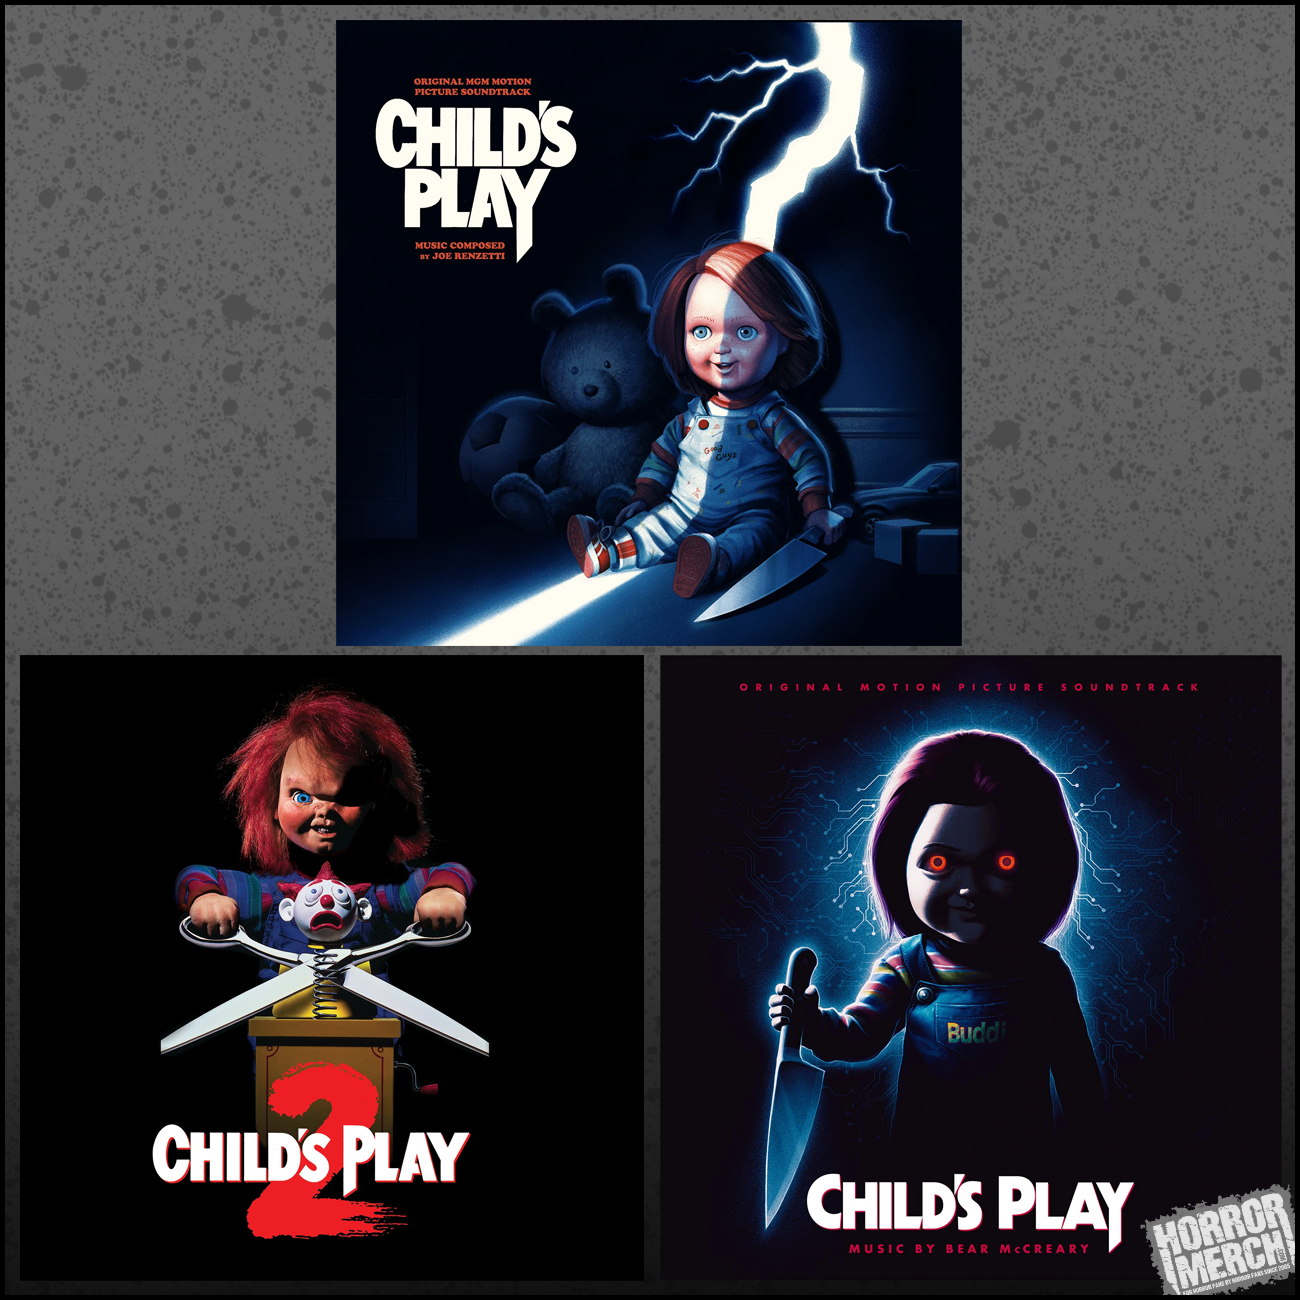 Childs Play [Soundtrack] - Free Shipping!